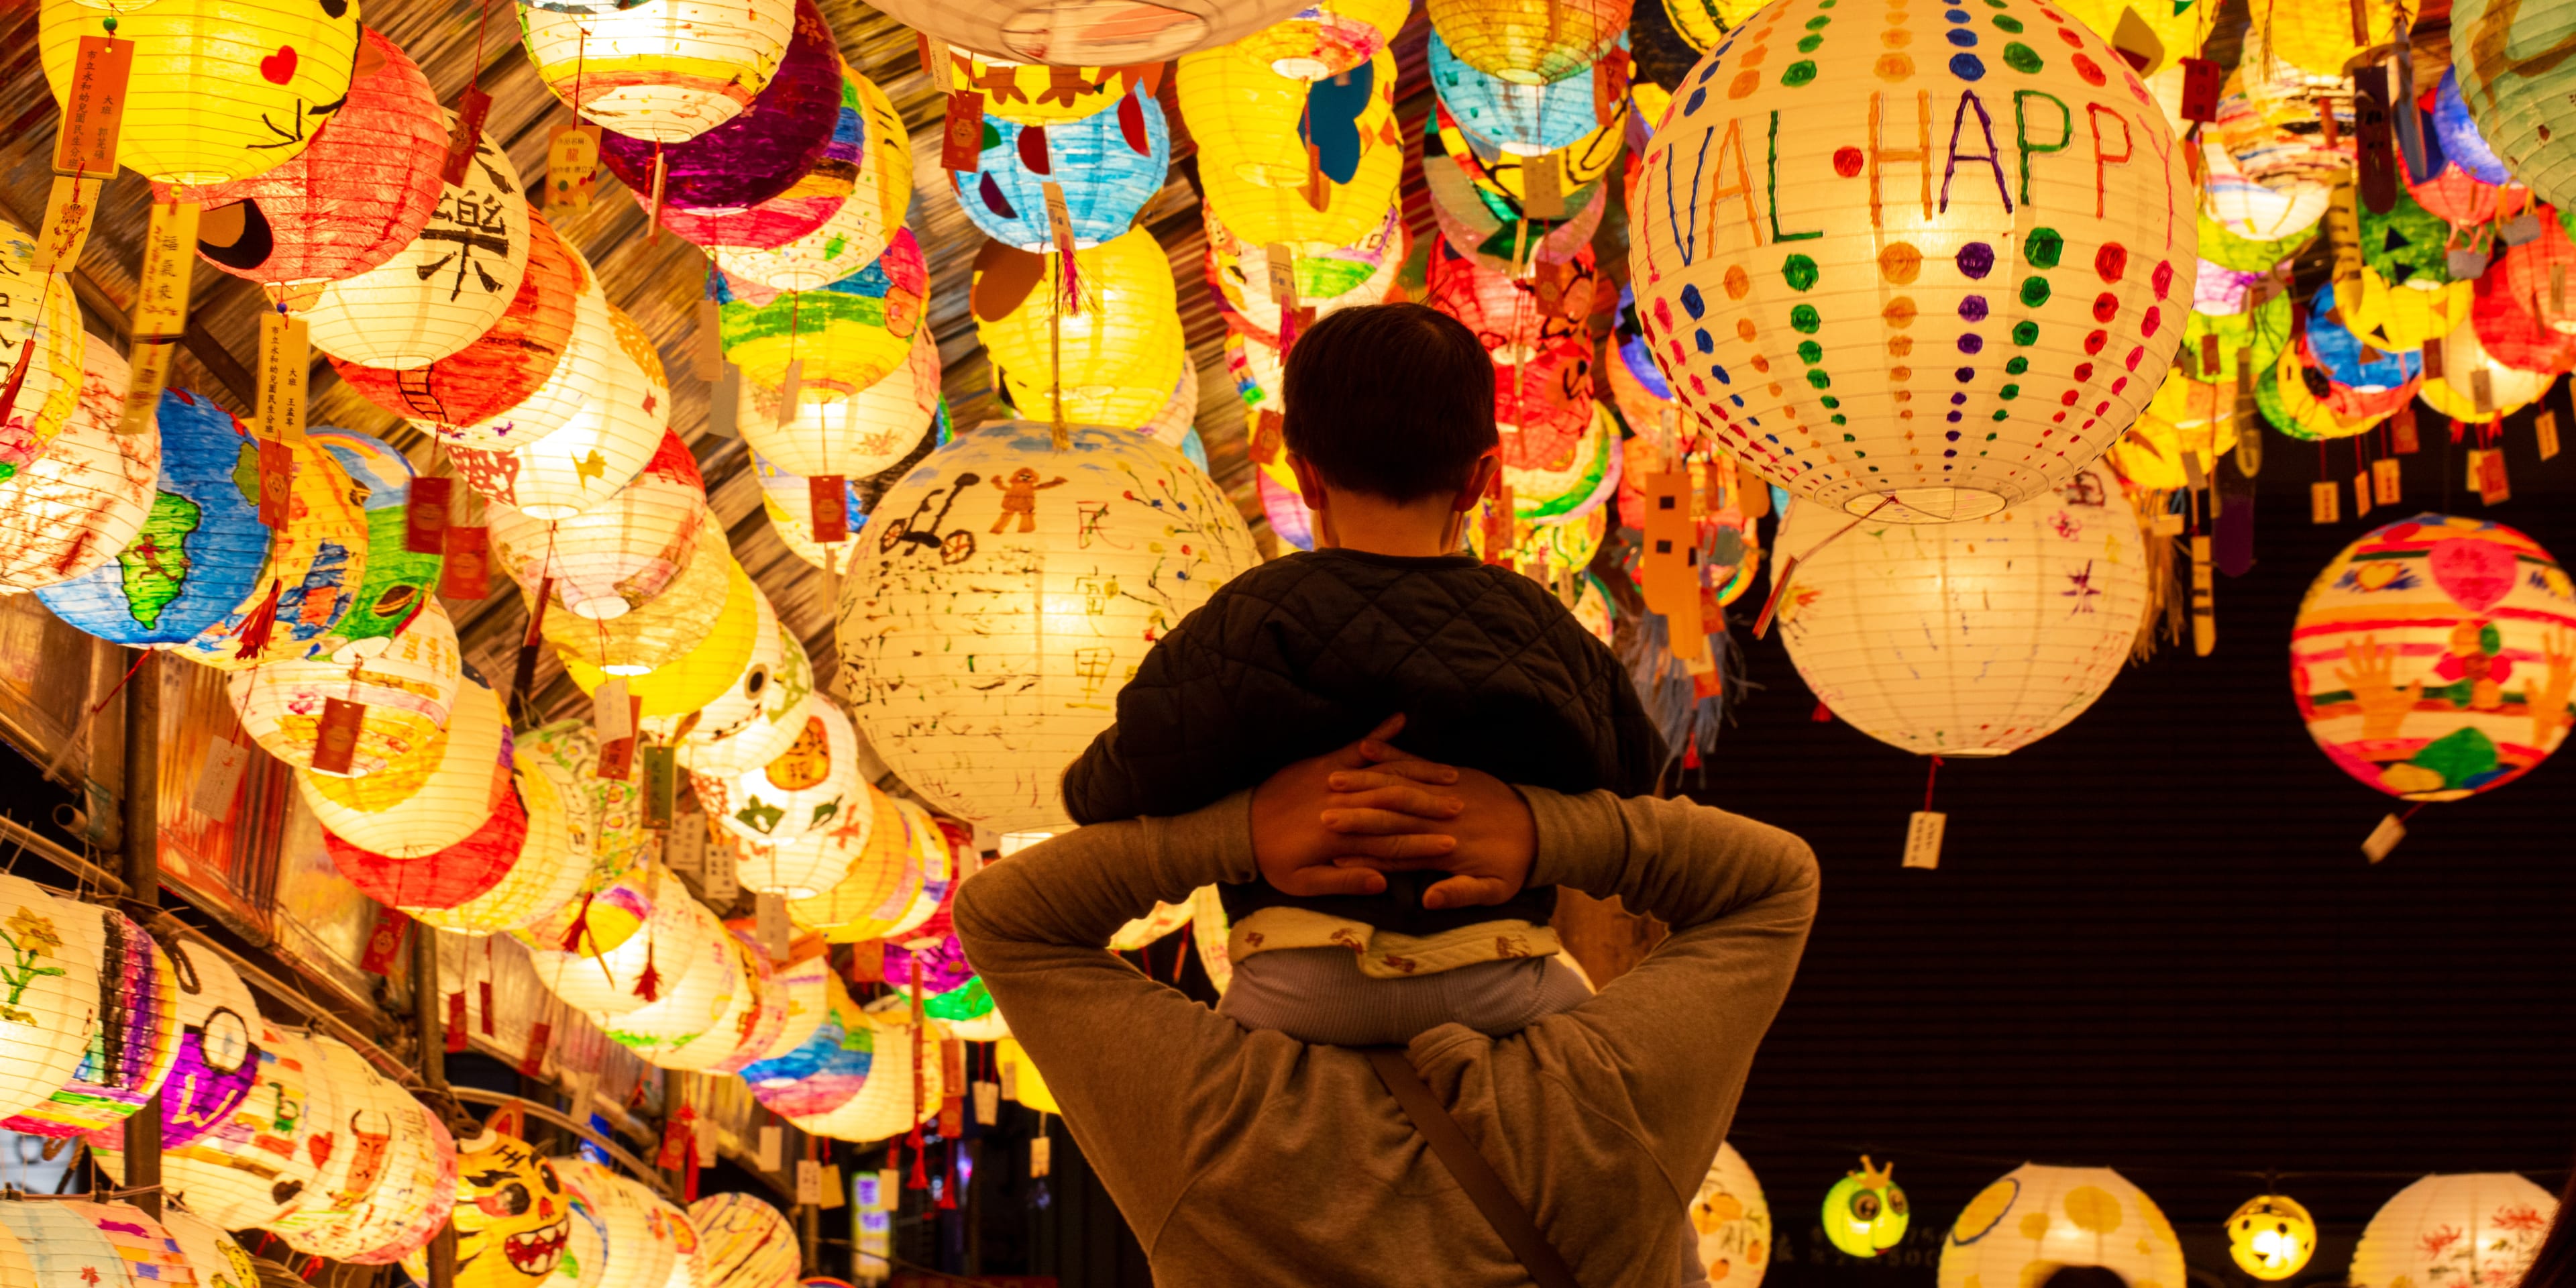 Child on shoulders of an adult at Lantern Festival